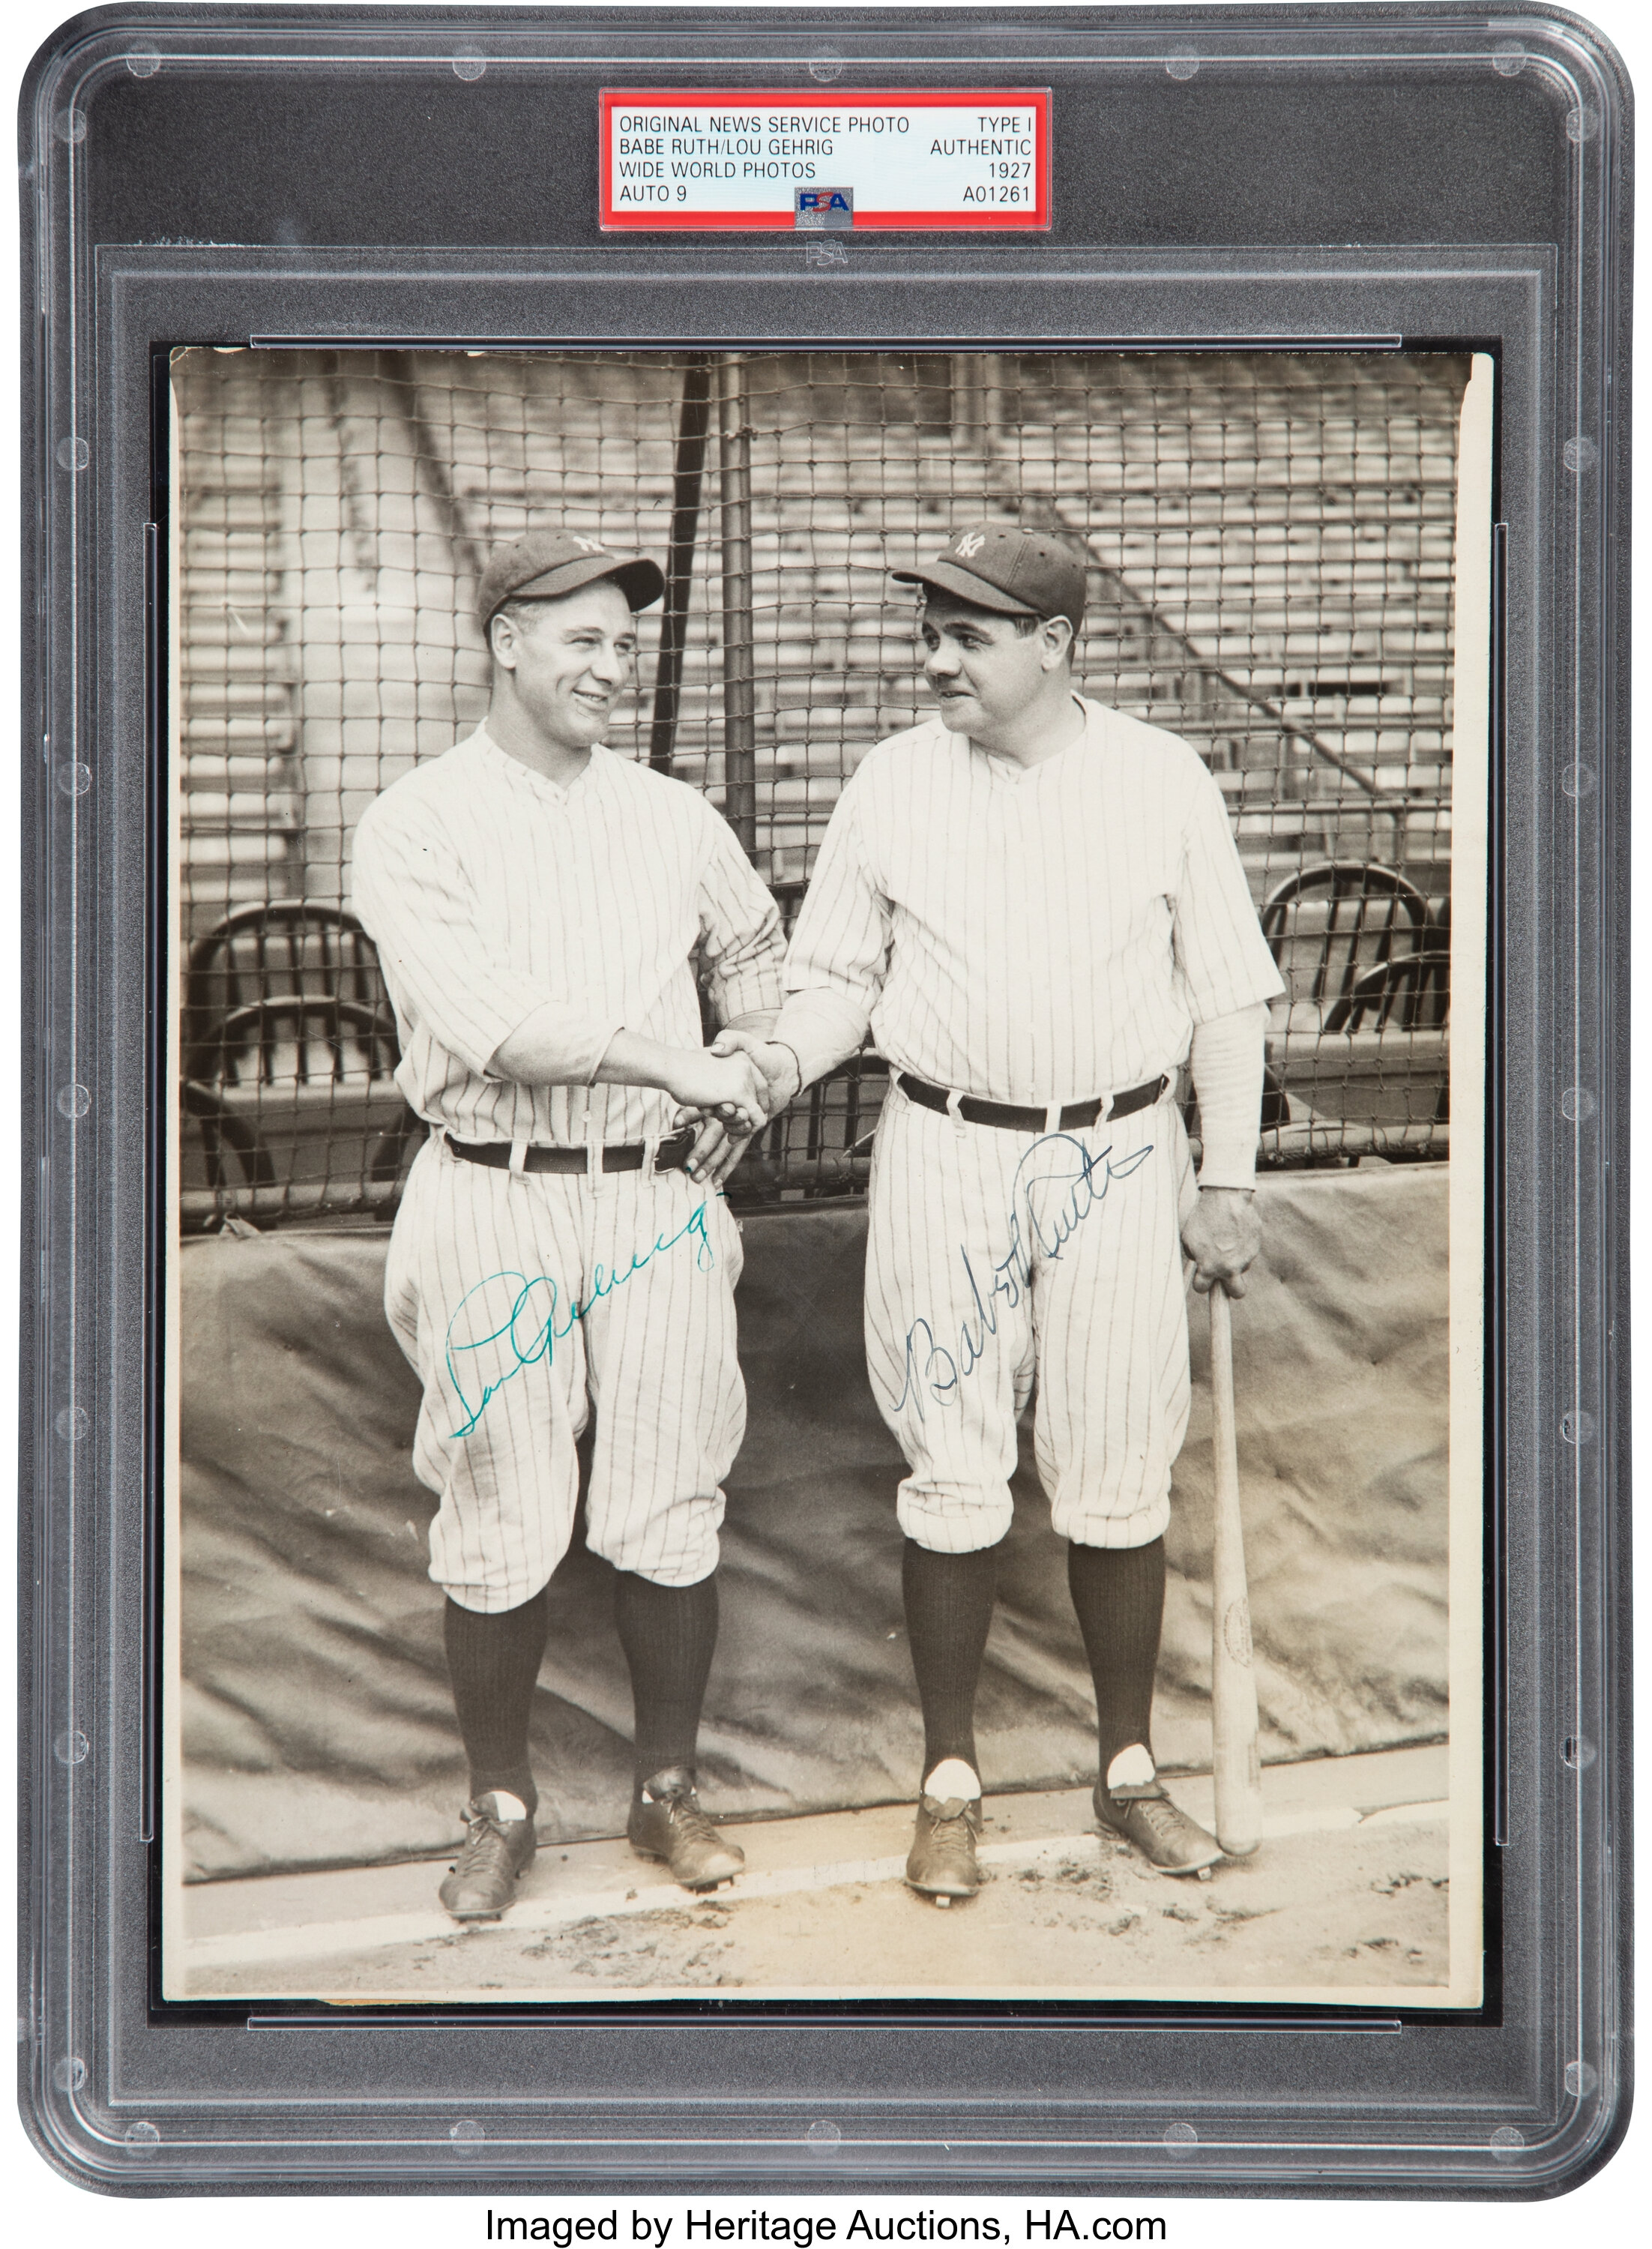 1927 Yankees Pic Signed By Babe Ruth & Lou Gehrig Hits Auction